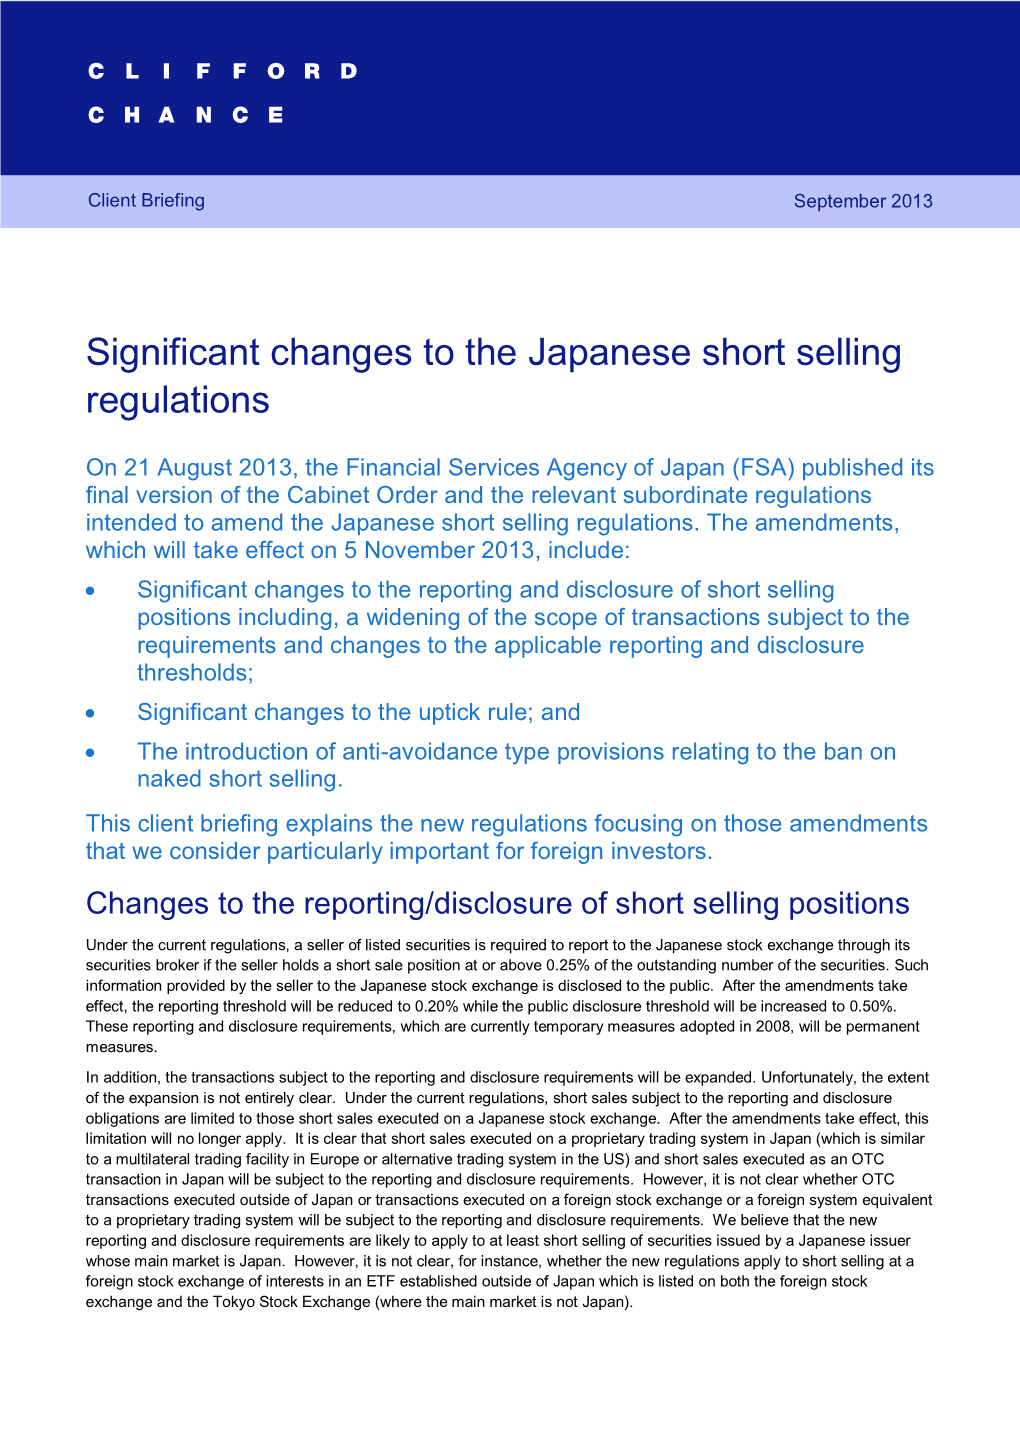 Significant Changes to the Japanese Short Selling Regulations